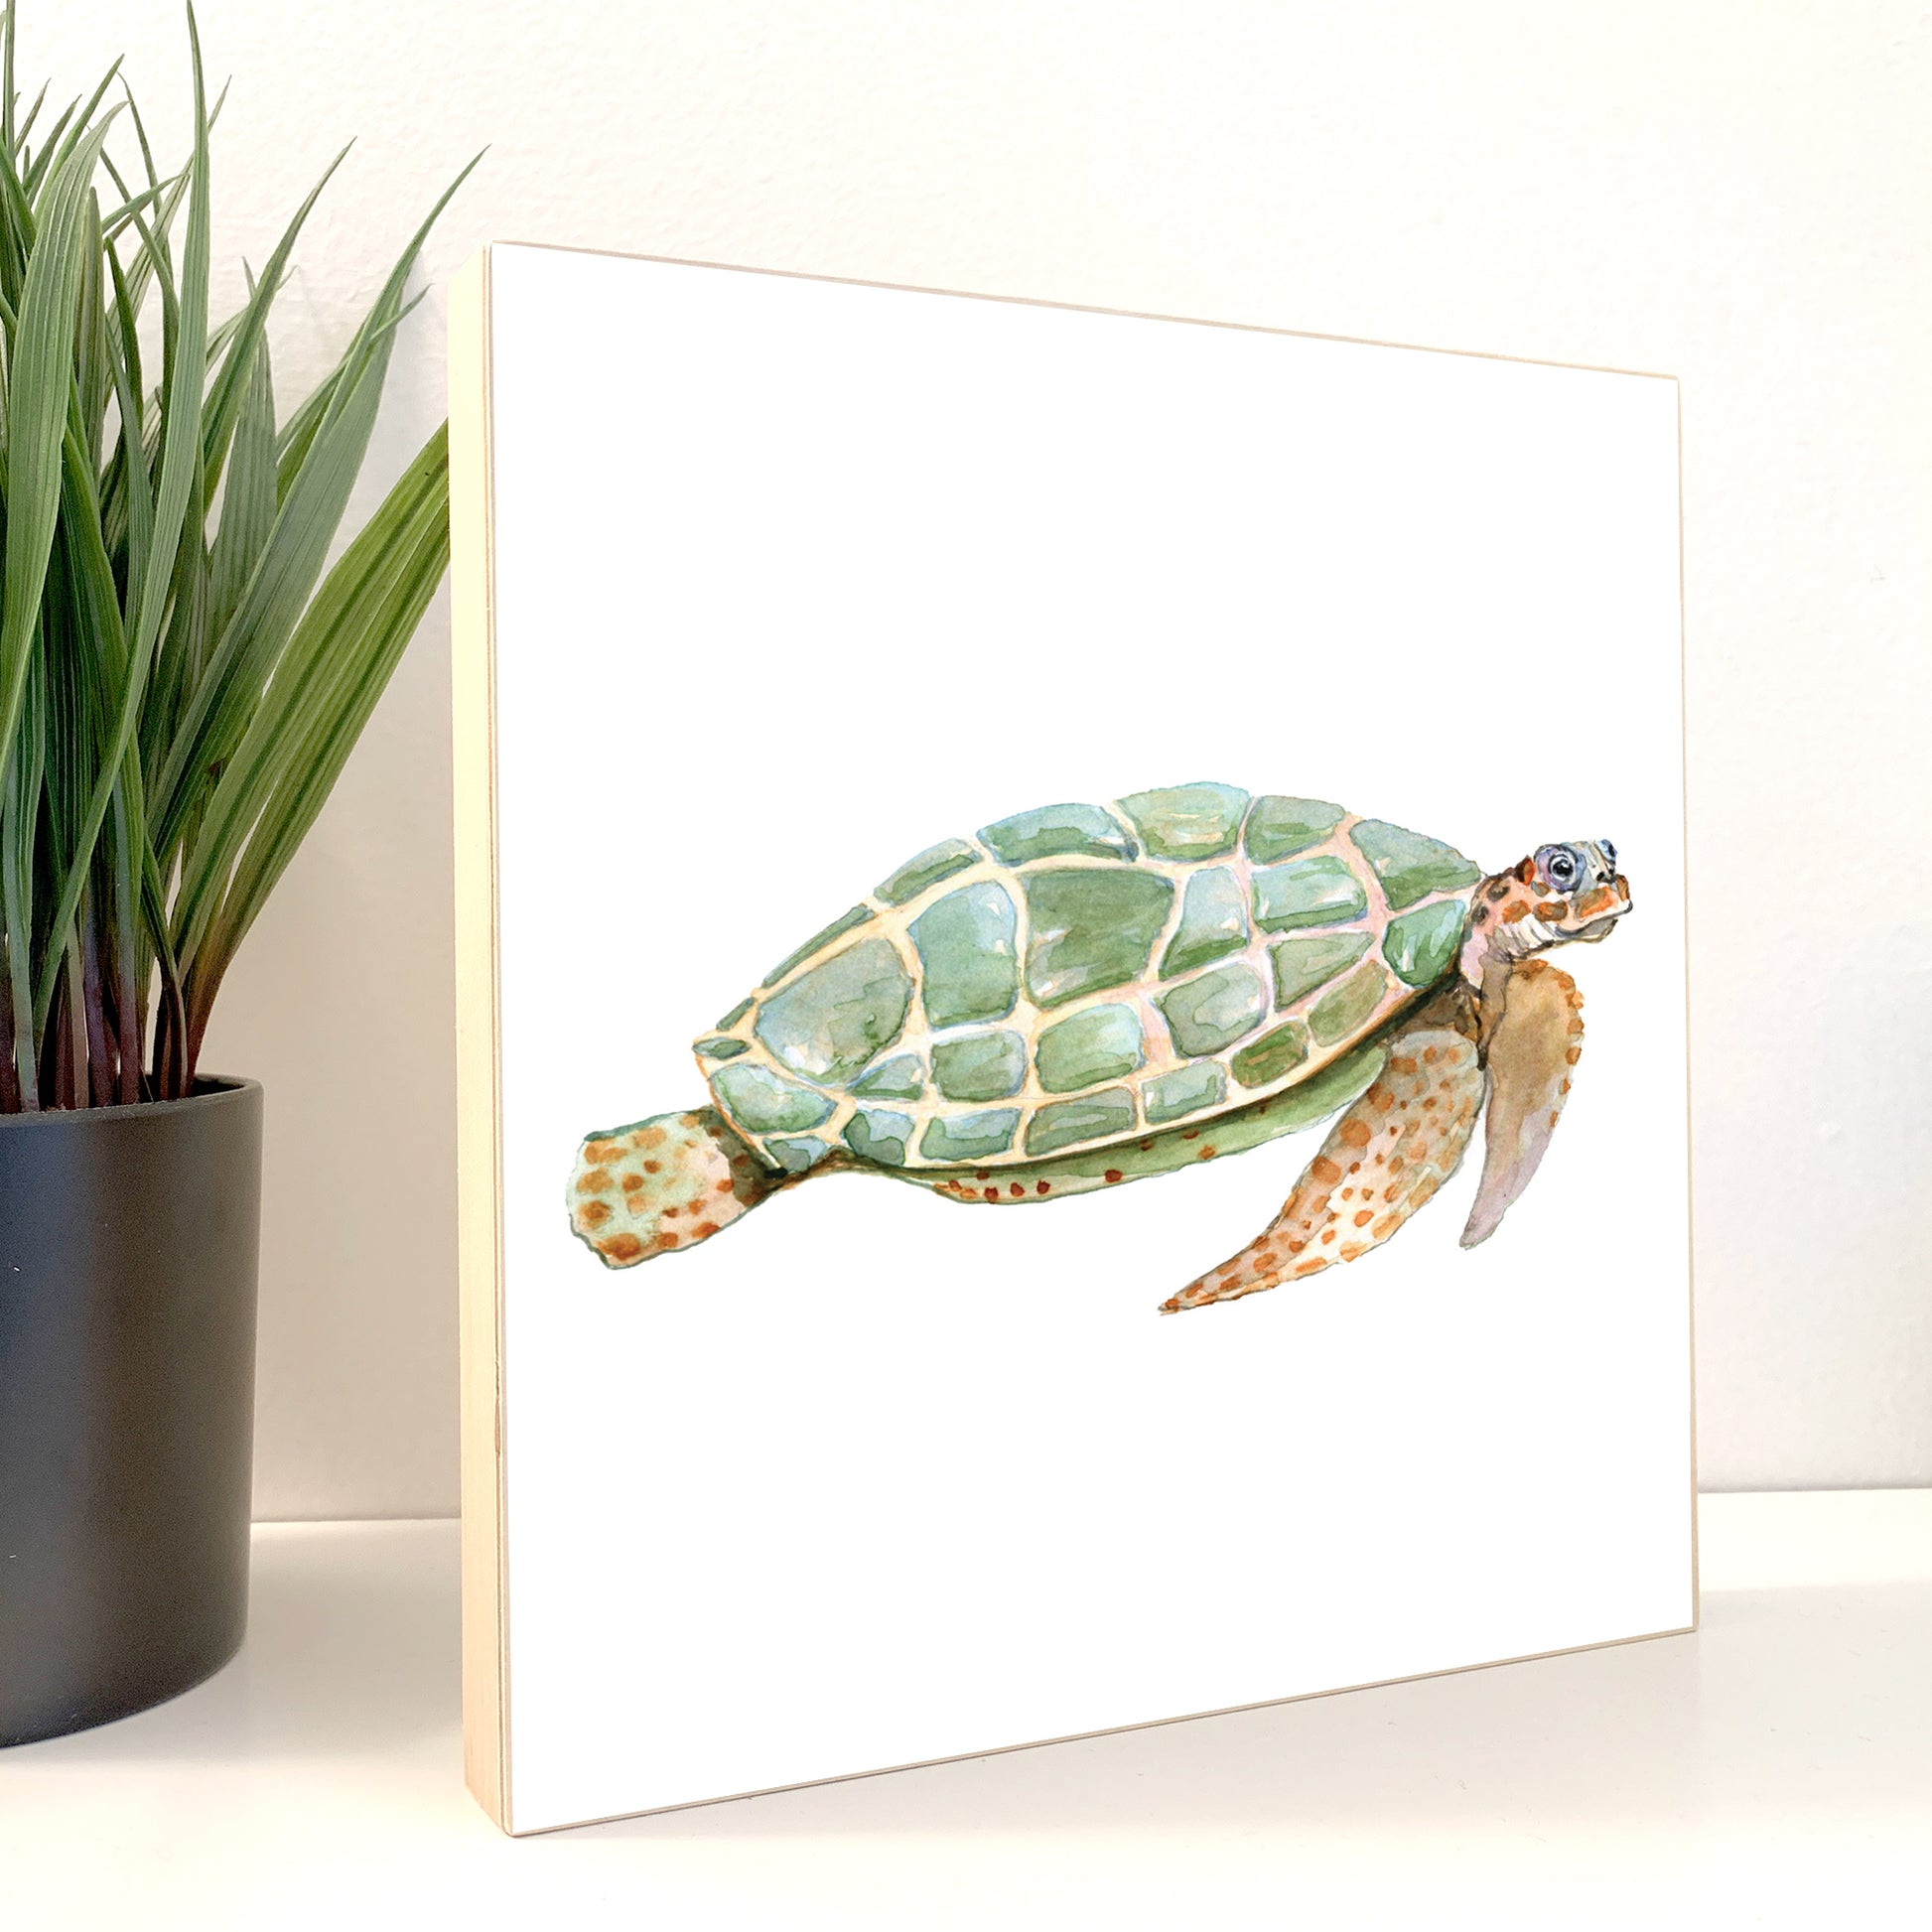 Green Turtle Watercolor Print on Wood Block - Flamingo Shores - Original Art for Home Decor and Gifts